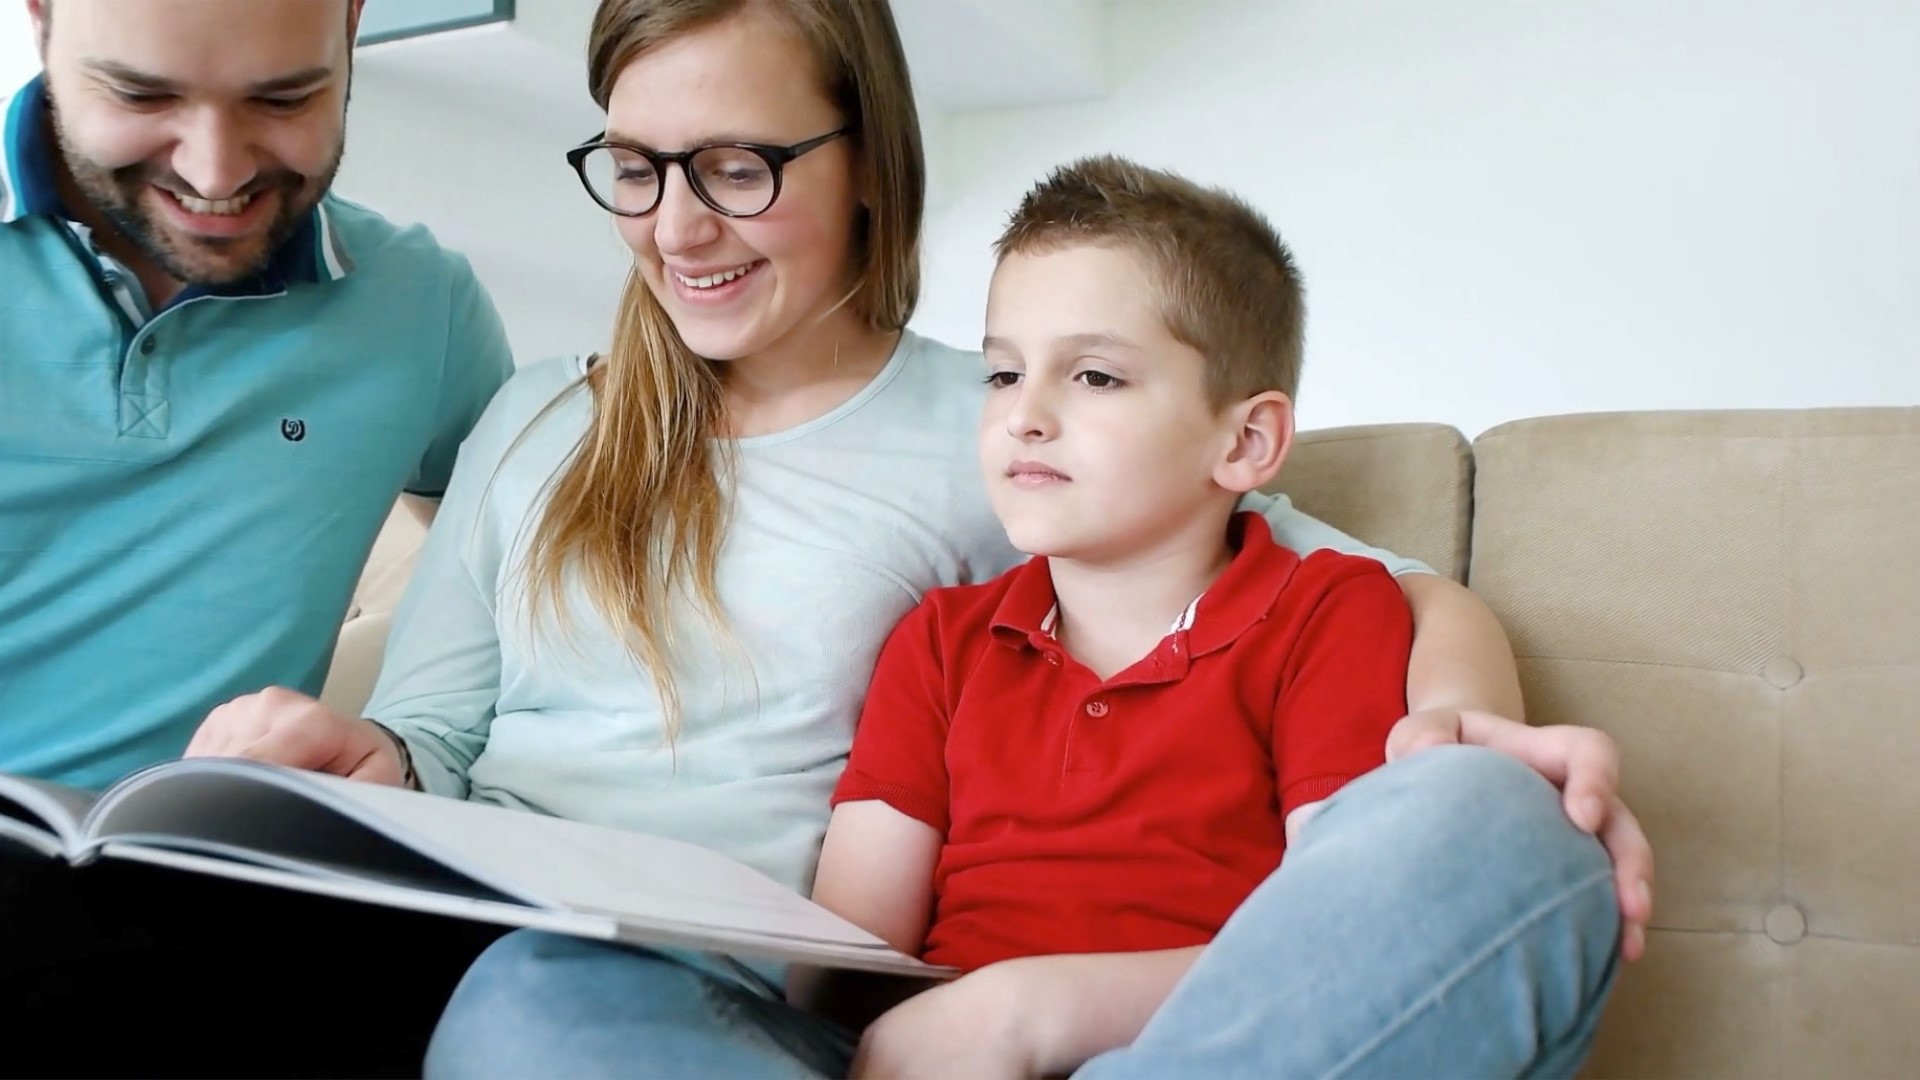 Parents are in charge of their children's education, and they are adding in things they find important. Buzz60's Keri Lumm shares the results of the new Kodable study conducted by OnePoll.